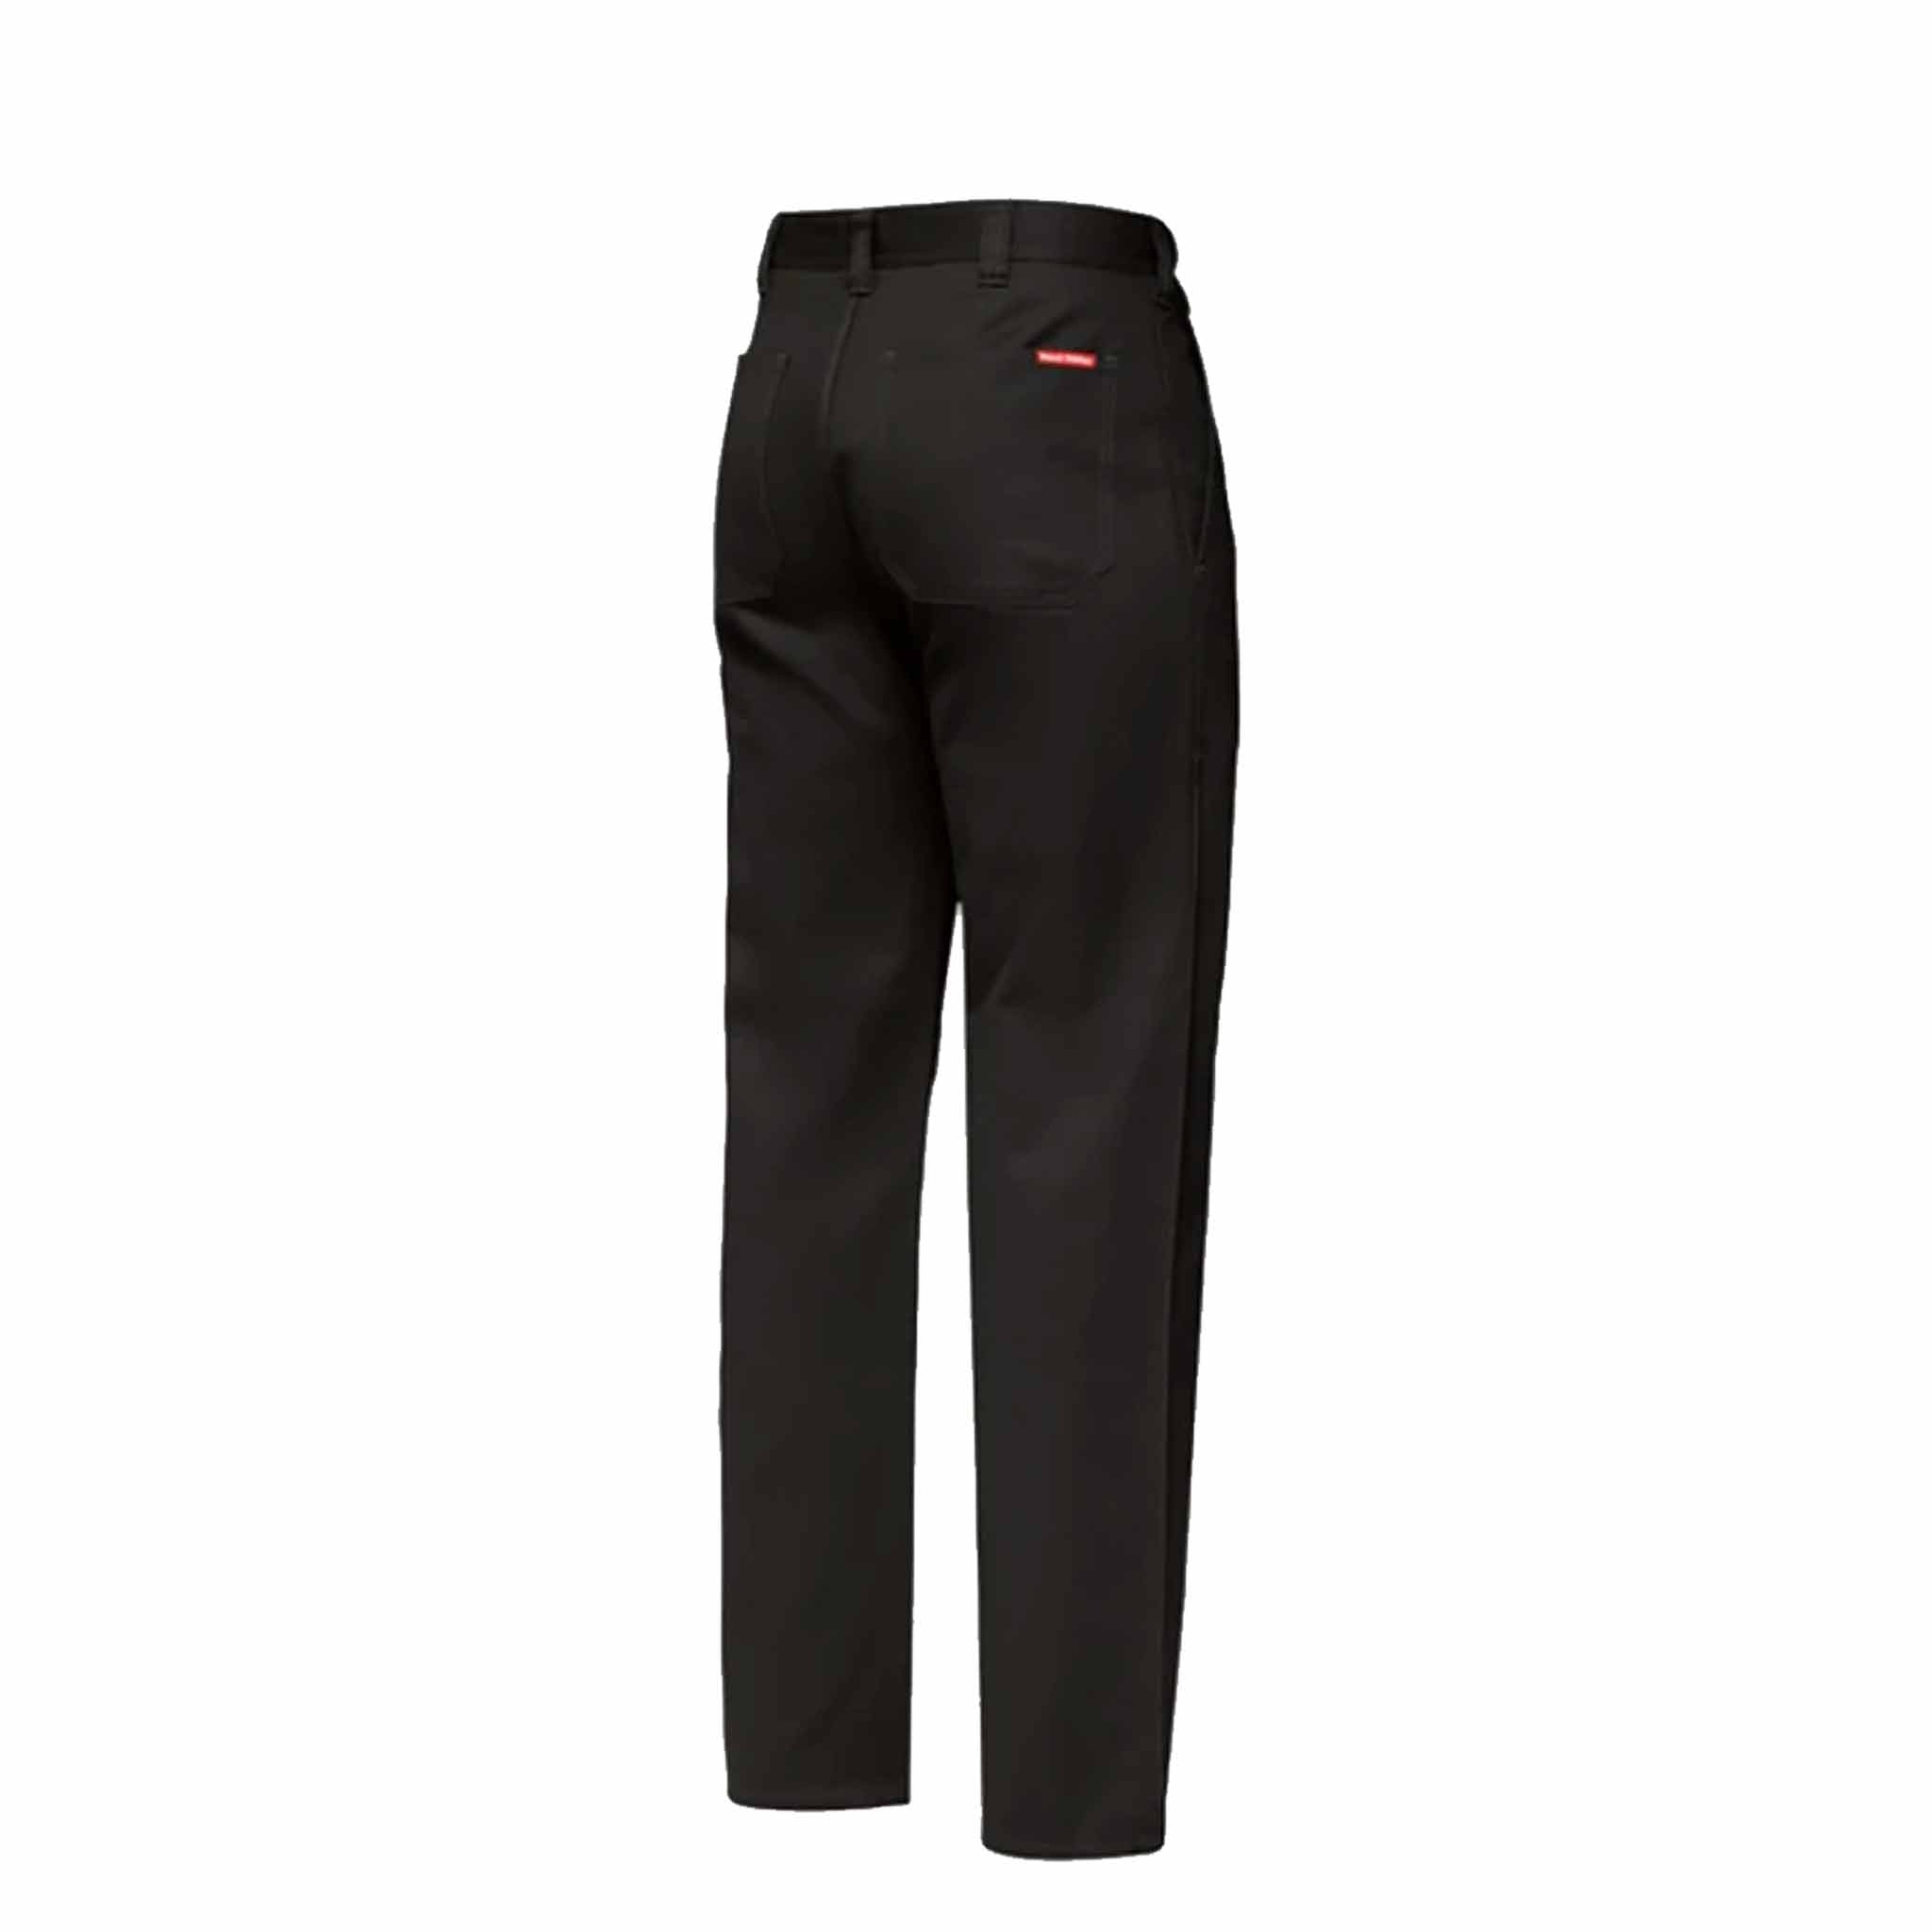 FOUNDATIONS COTTON DRILL PANT - Y02501 - Tradies Workwear